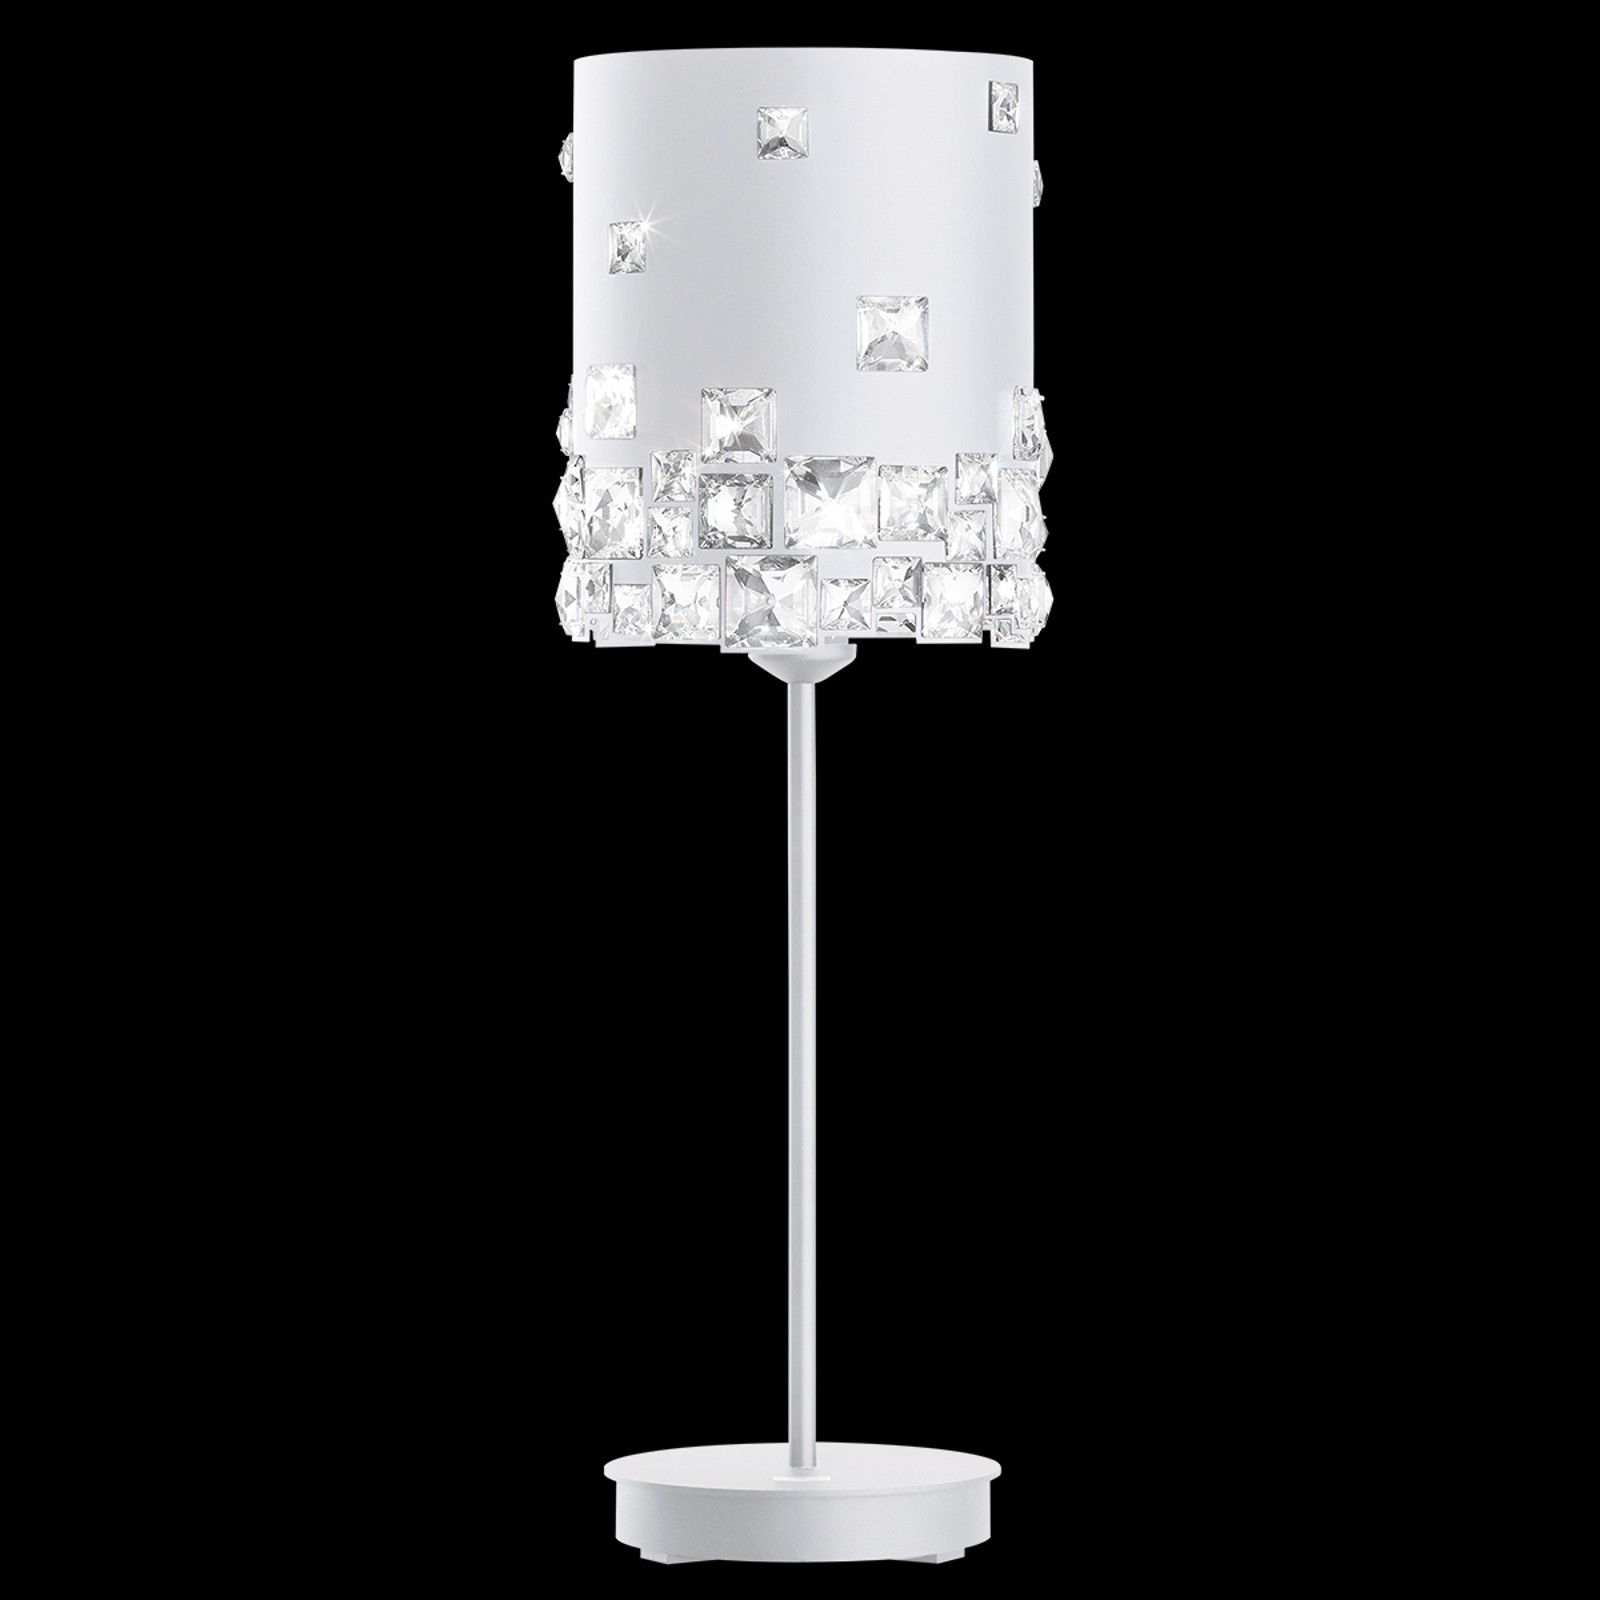 White table lamp mosaix with swarovski crystals